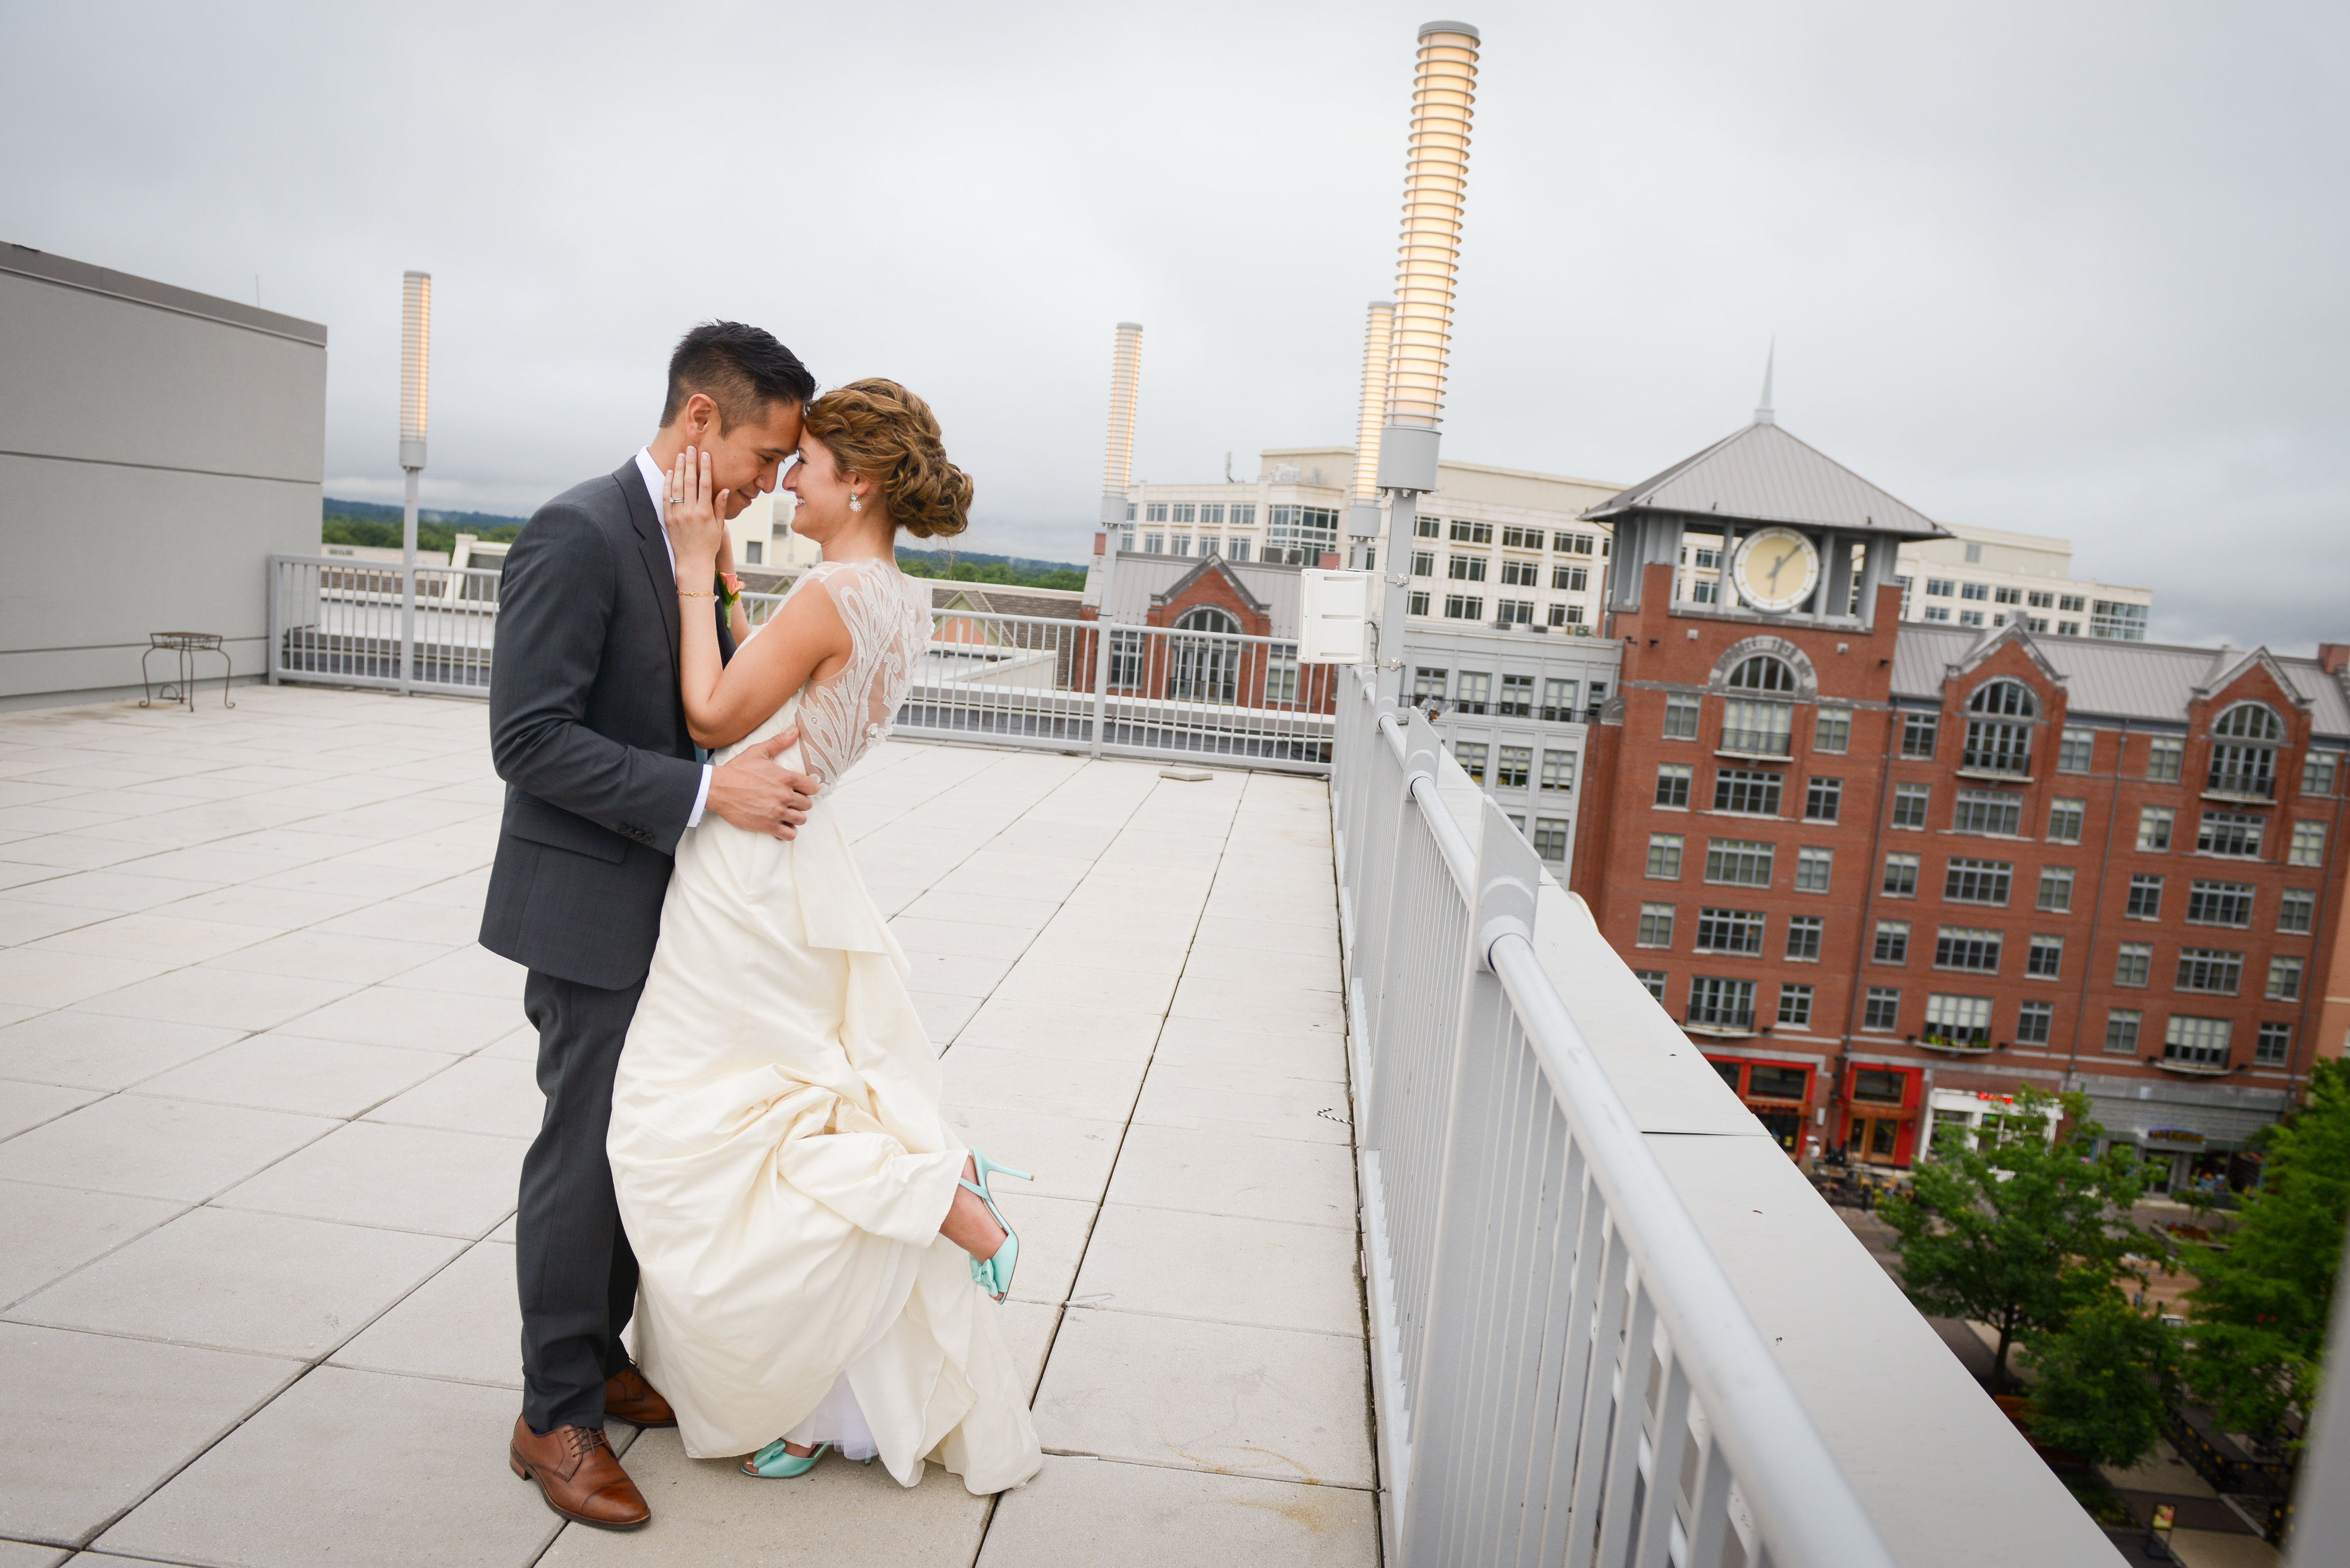 View More: http://ericahilliardphotography.pass.us/natalie-and-xavier-wedding